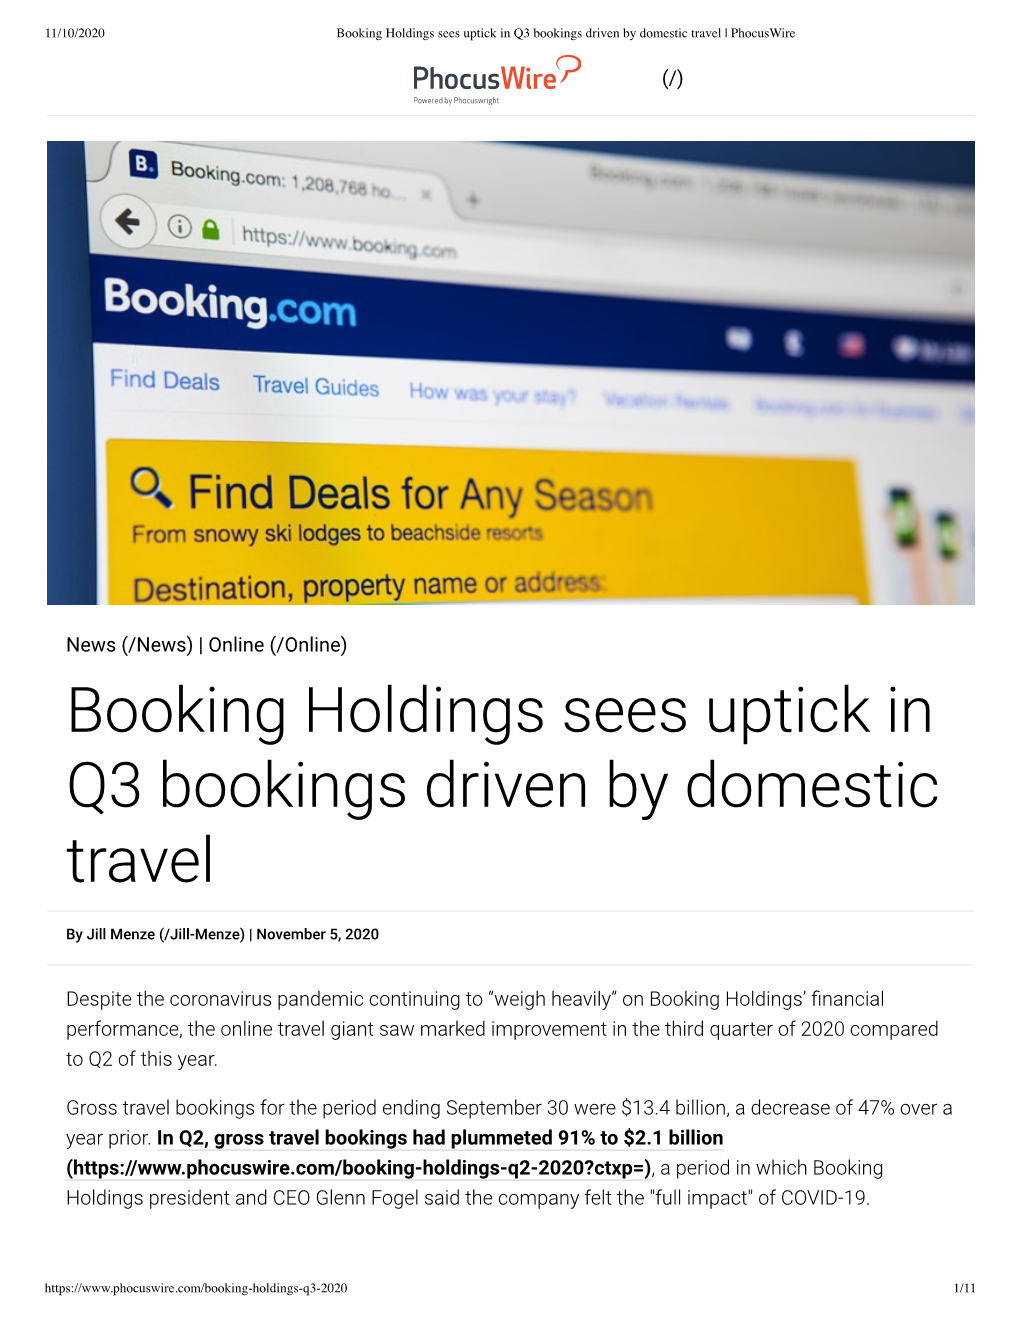 Booking Holdings Sees Uptick in Q3 Bookings Driven by Domestic Travel | Phocuswire